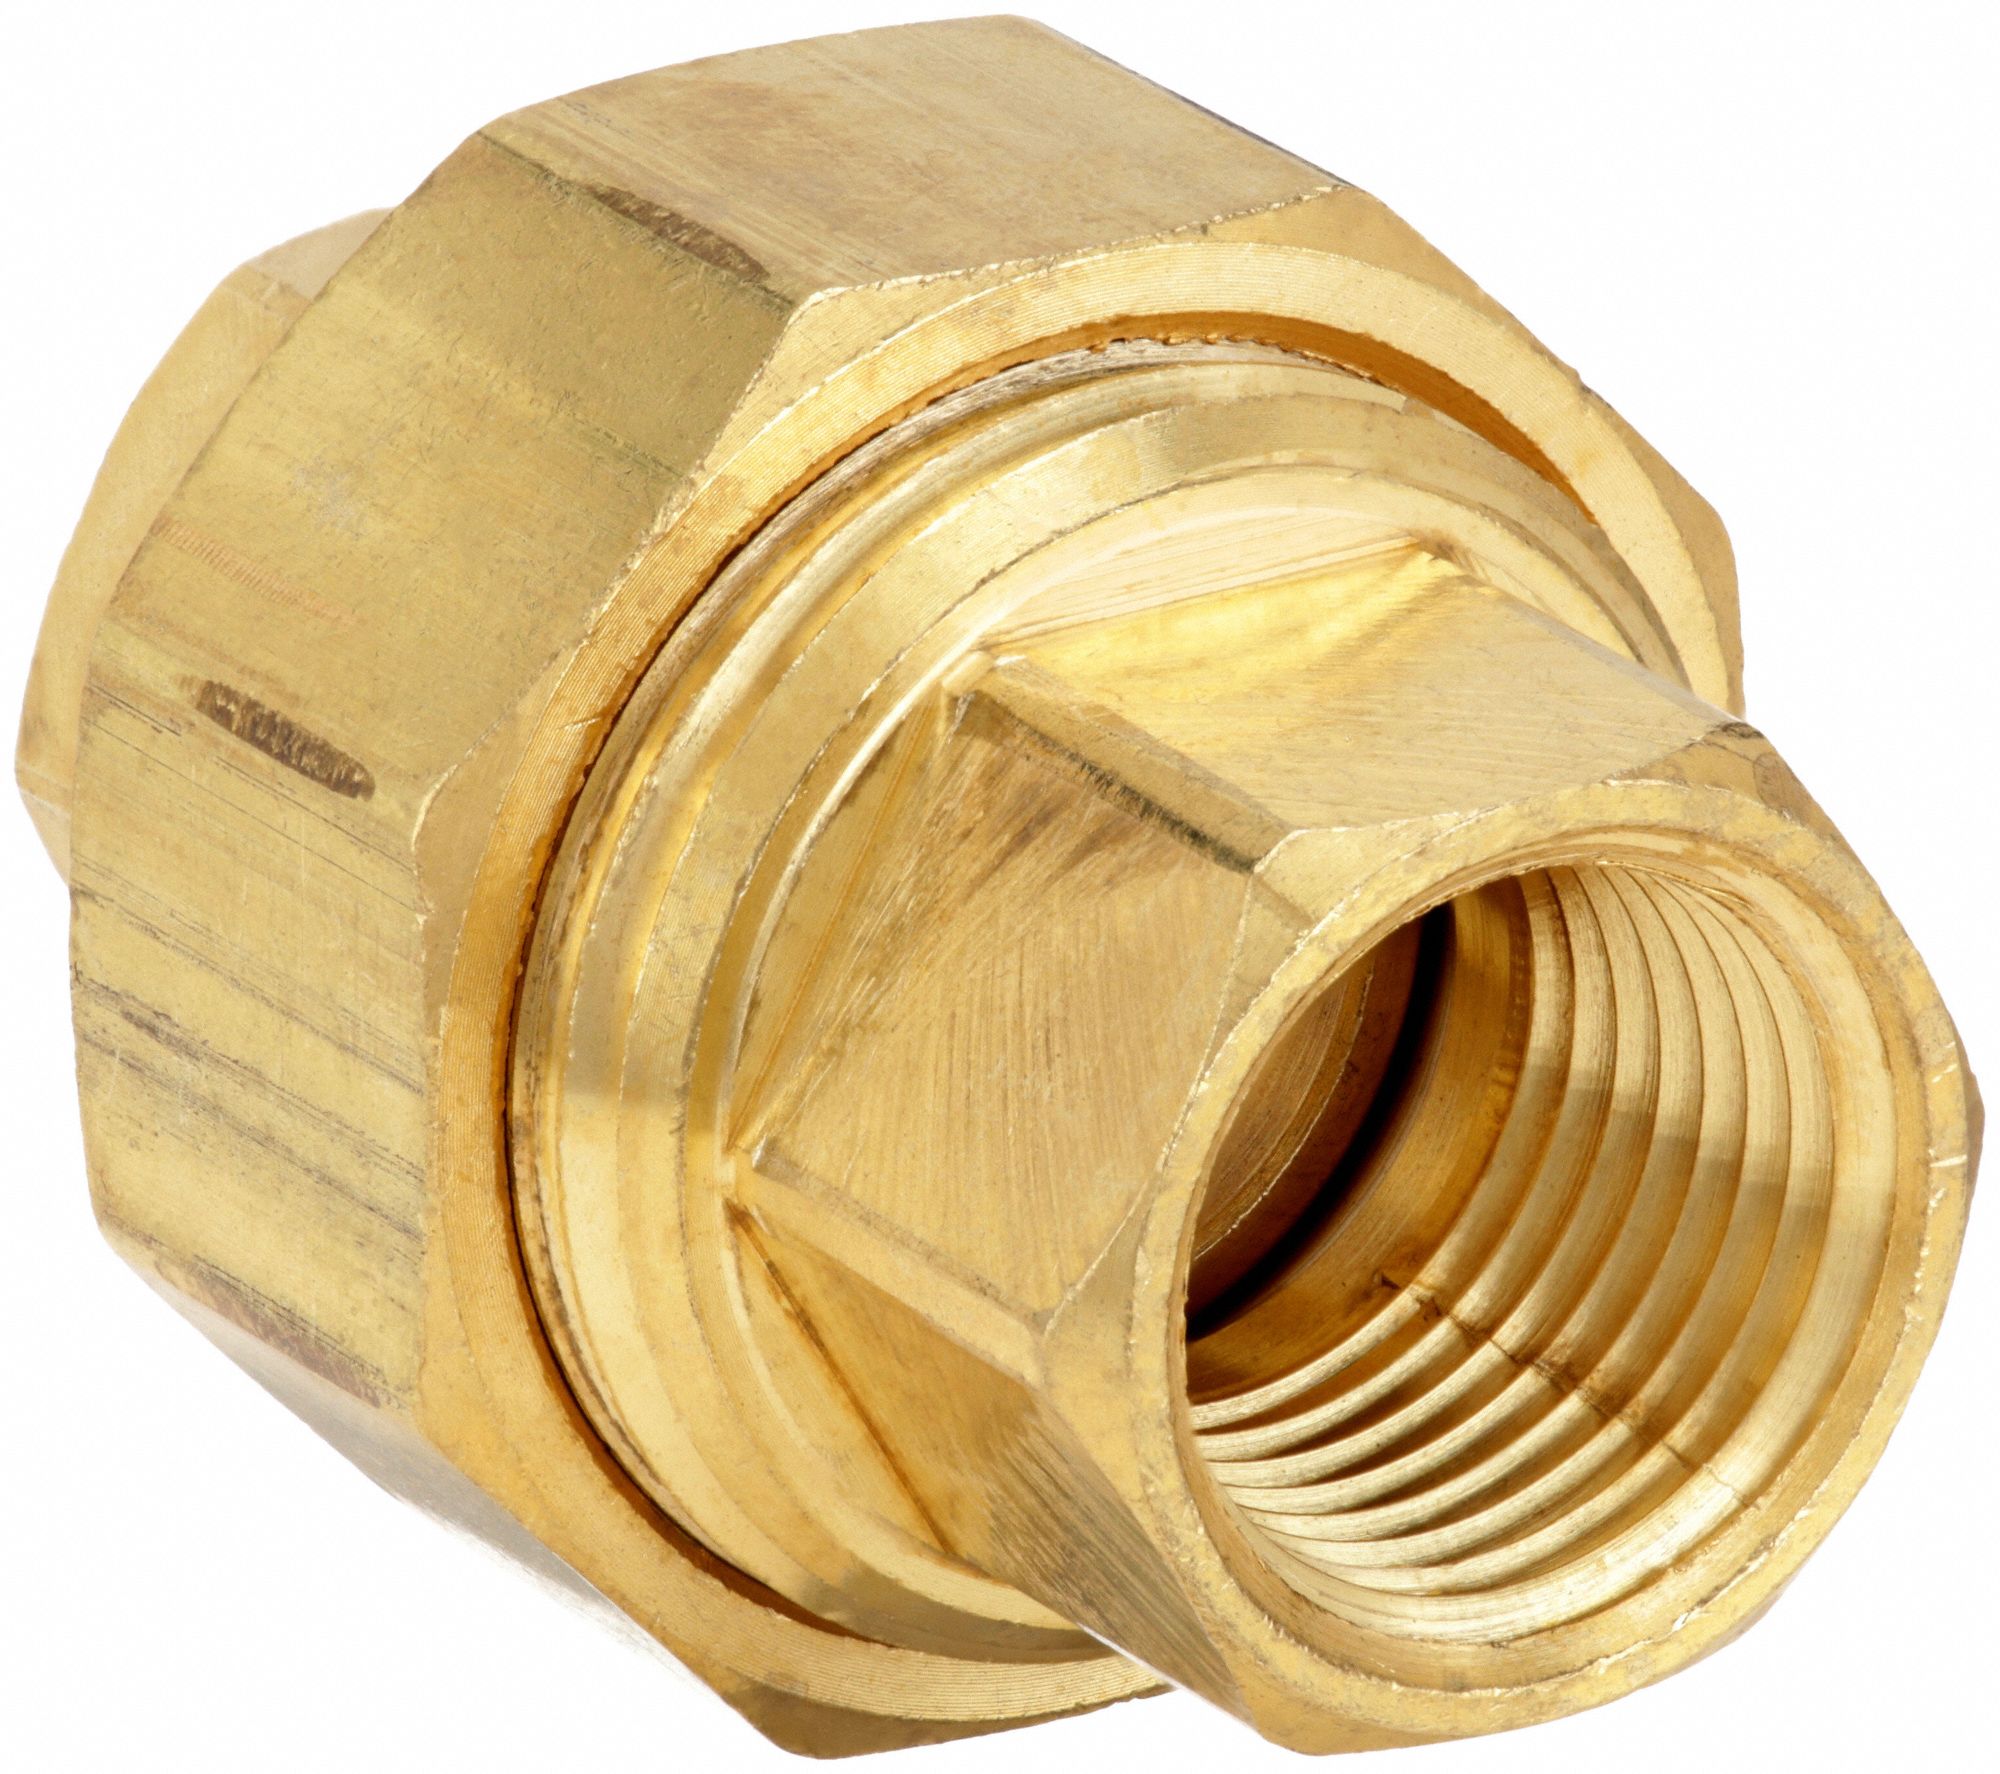 APPROVED VENDOR UNION, BRASS,1/2 IN.,FNPT - Metal Pipe Fittings